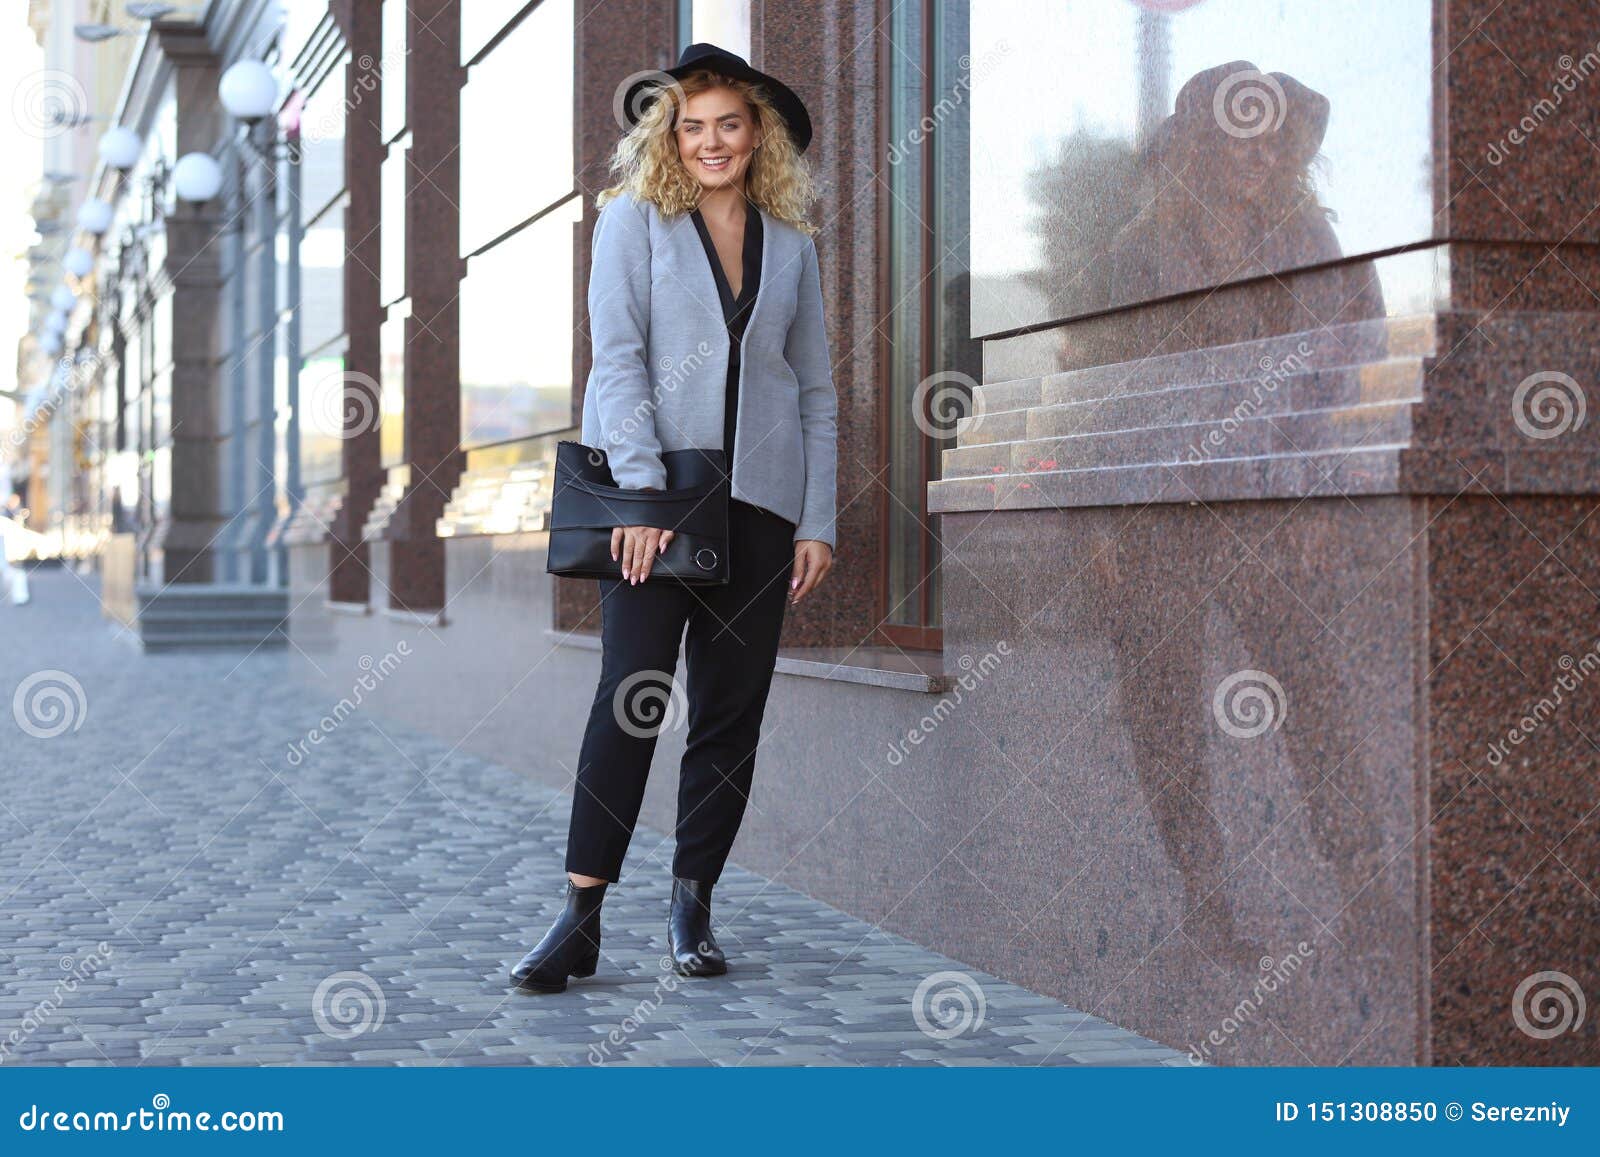 fashionable young woman outdoors fashionable young woman outdoors 151308850